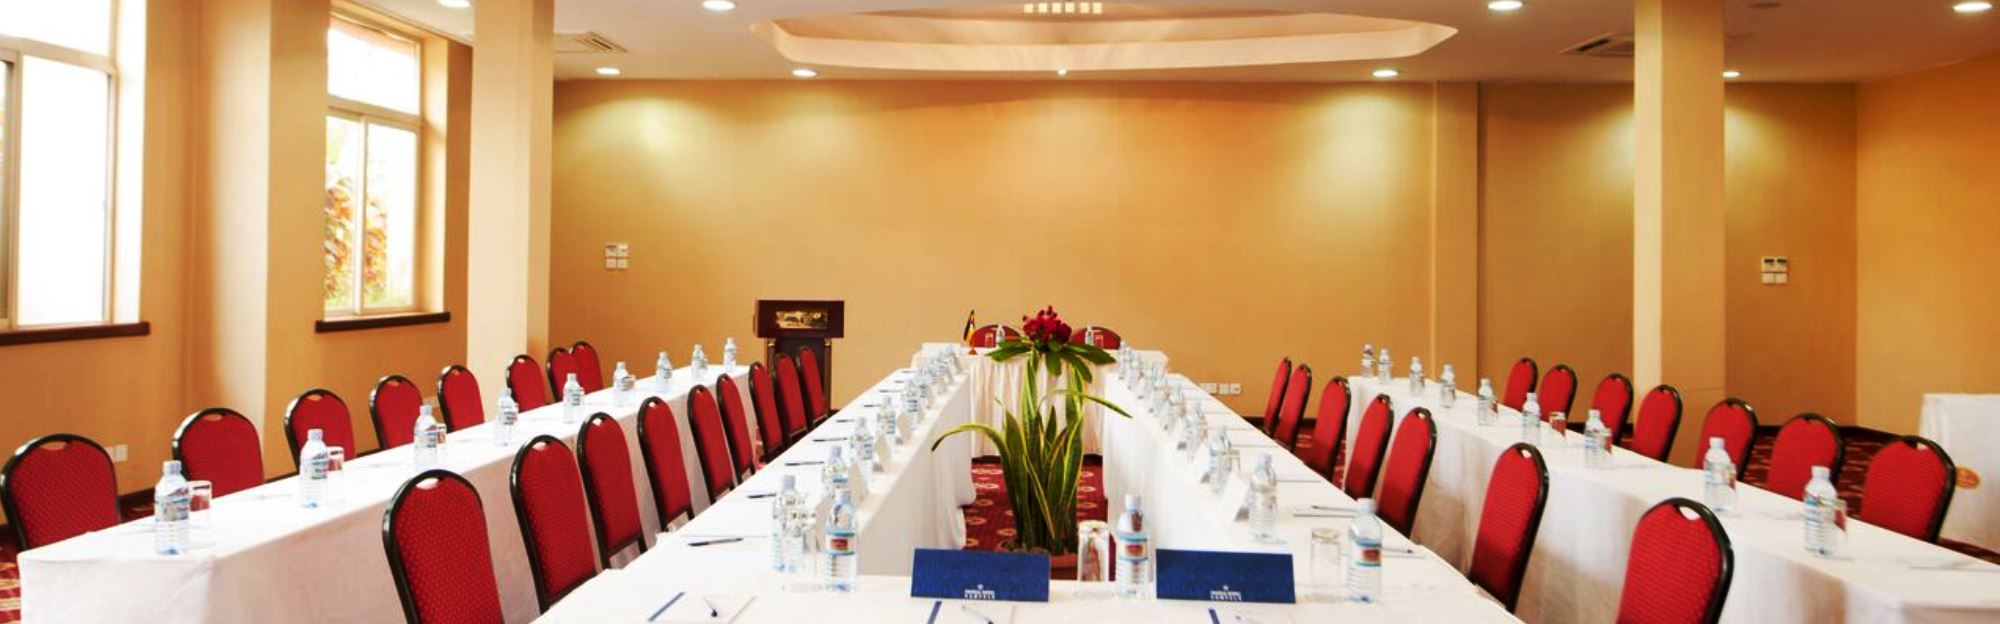 Mbale Resort Hotel Conference & Venues